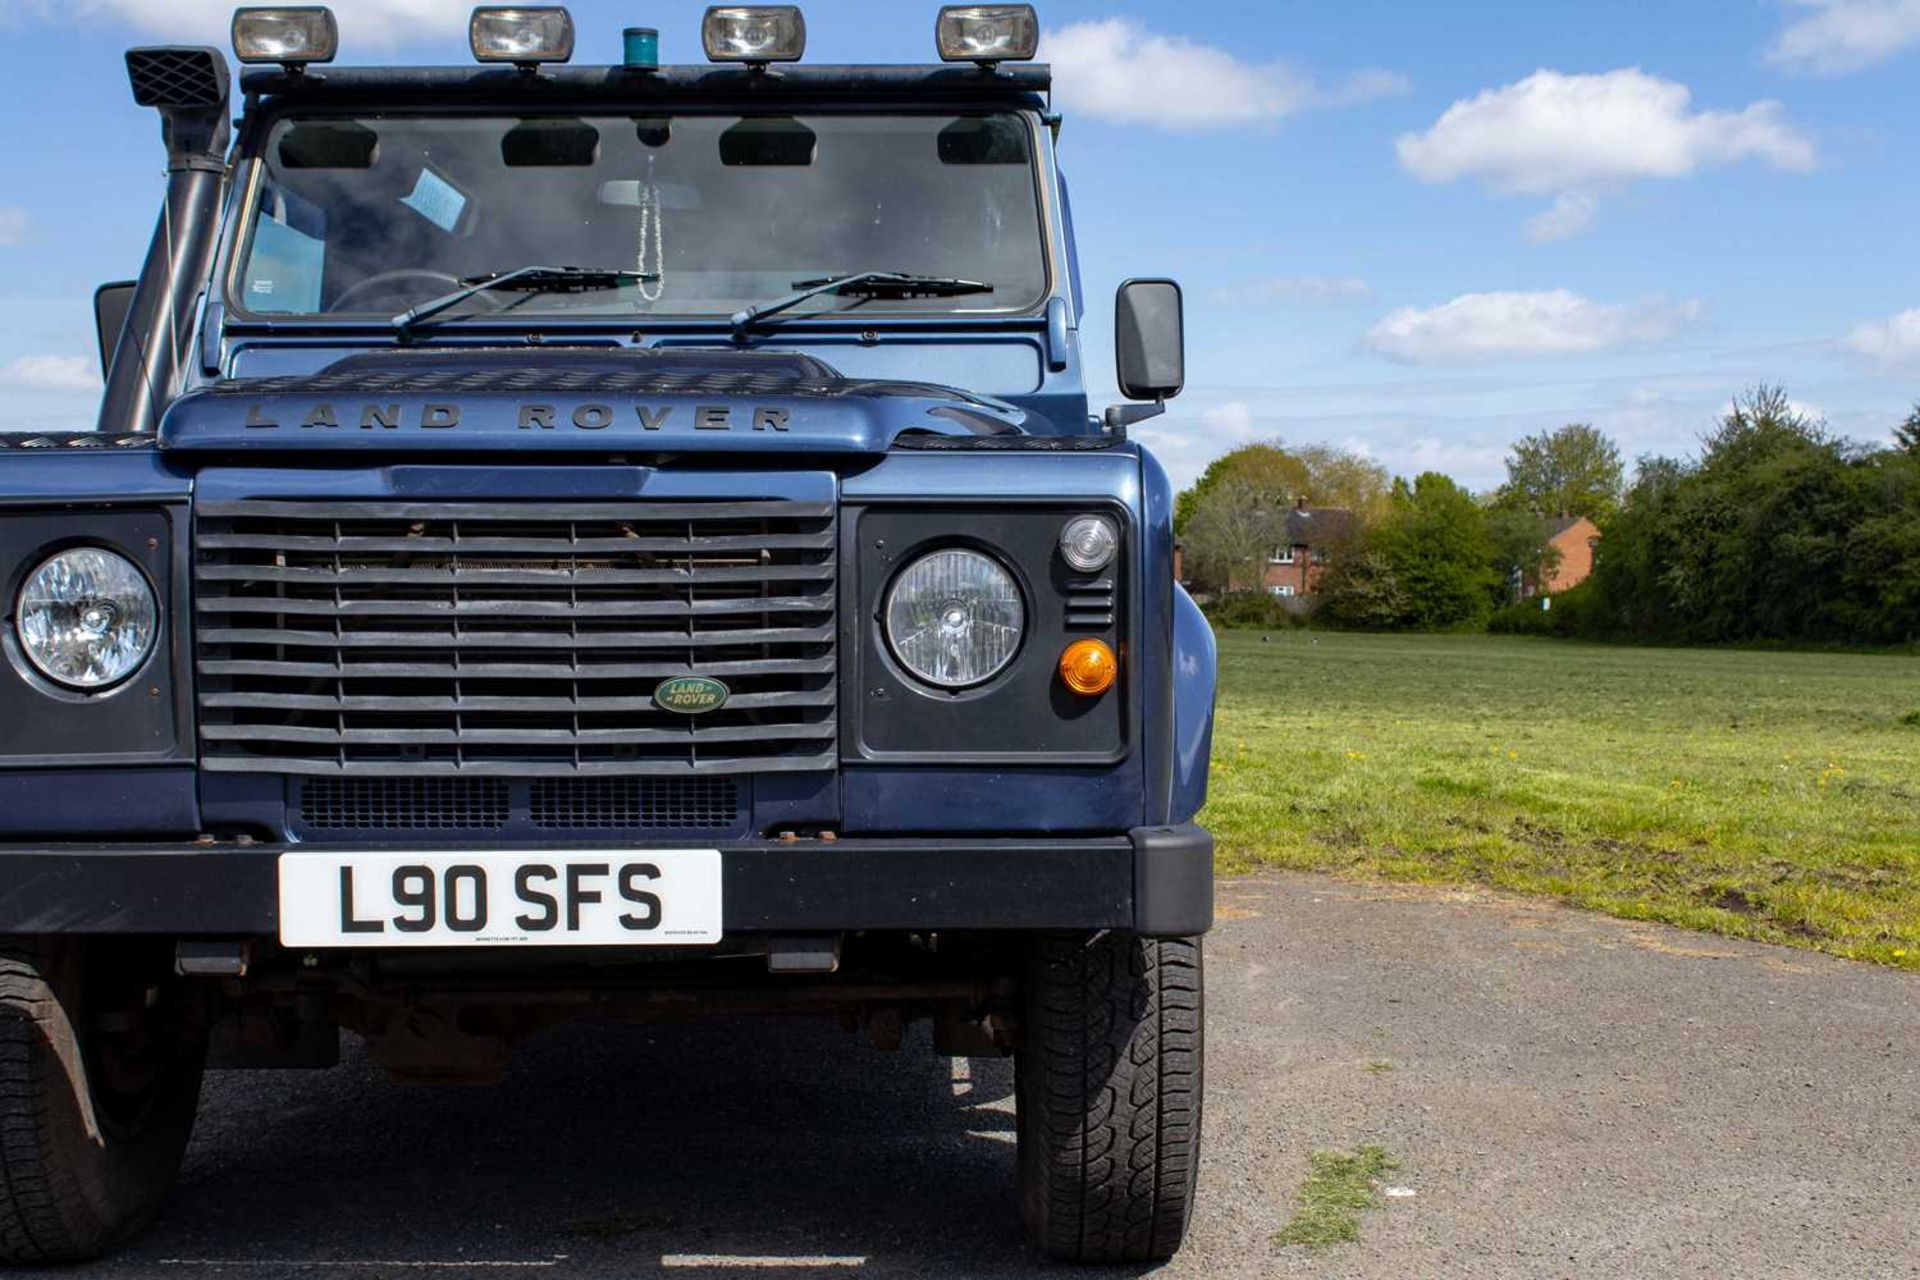 2007 Land Rover Defender 90 County  Powered by the 2.4-litre TDCi unit and features numerous tastefu - Image 4 of 76